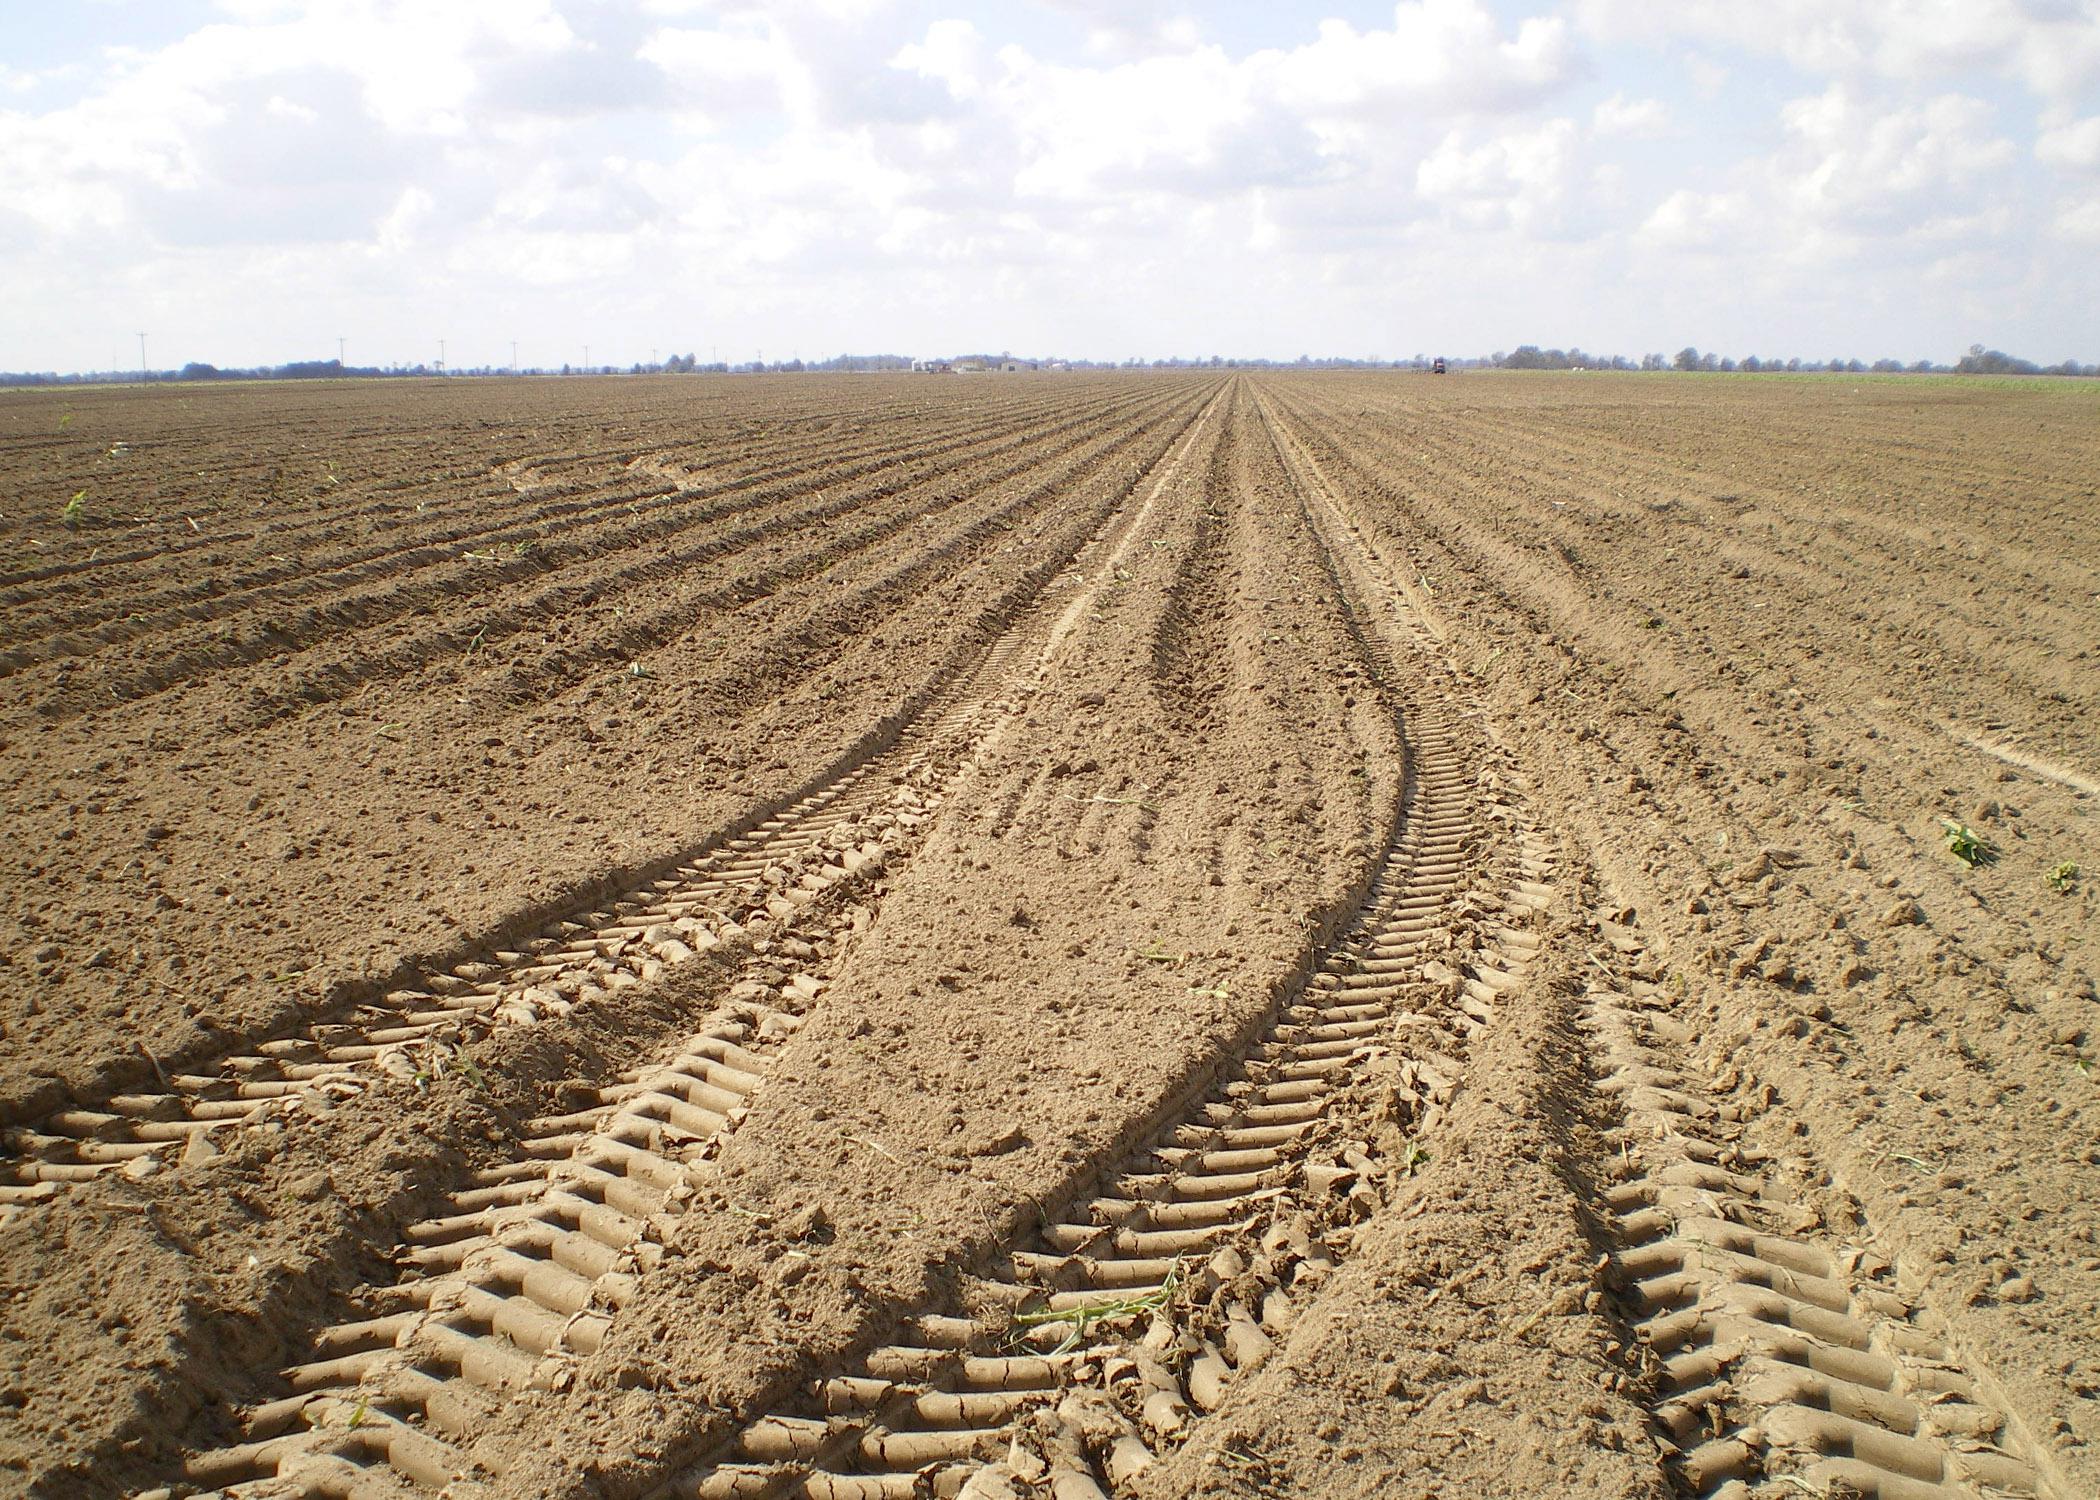 Tire tracks crisscross this Bolivar County, Mississippi, field. Heavy farm equipment can compress soil underground, making it difficult for plants to reach moisture and nutrients. (Photo by MSU Extension Service/Laura Giaccaglia)